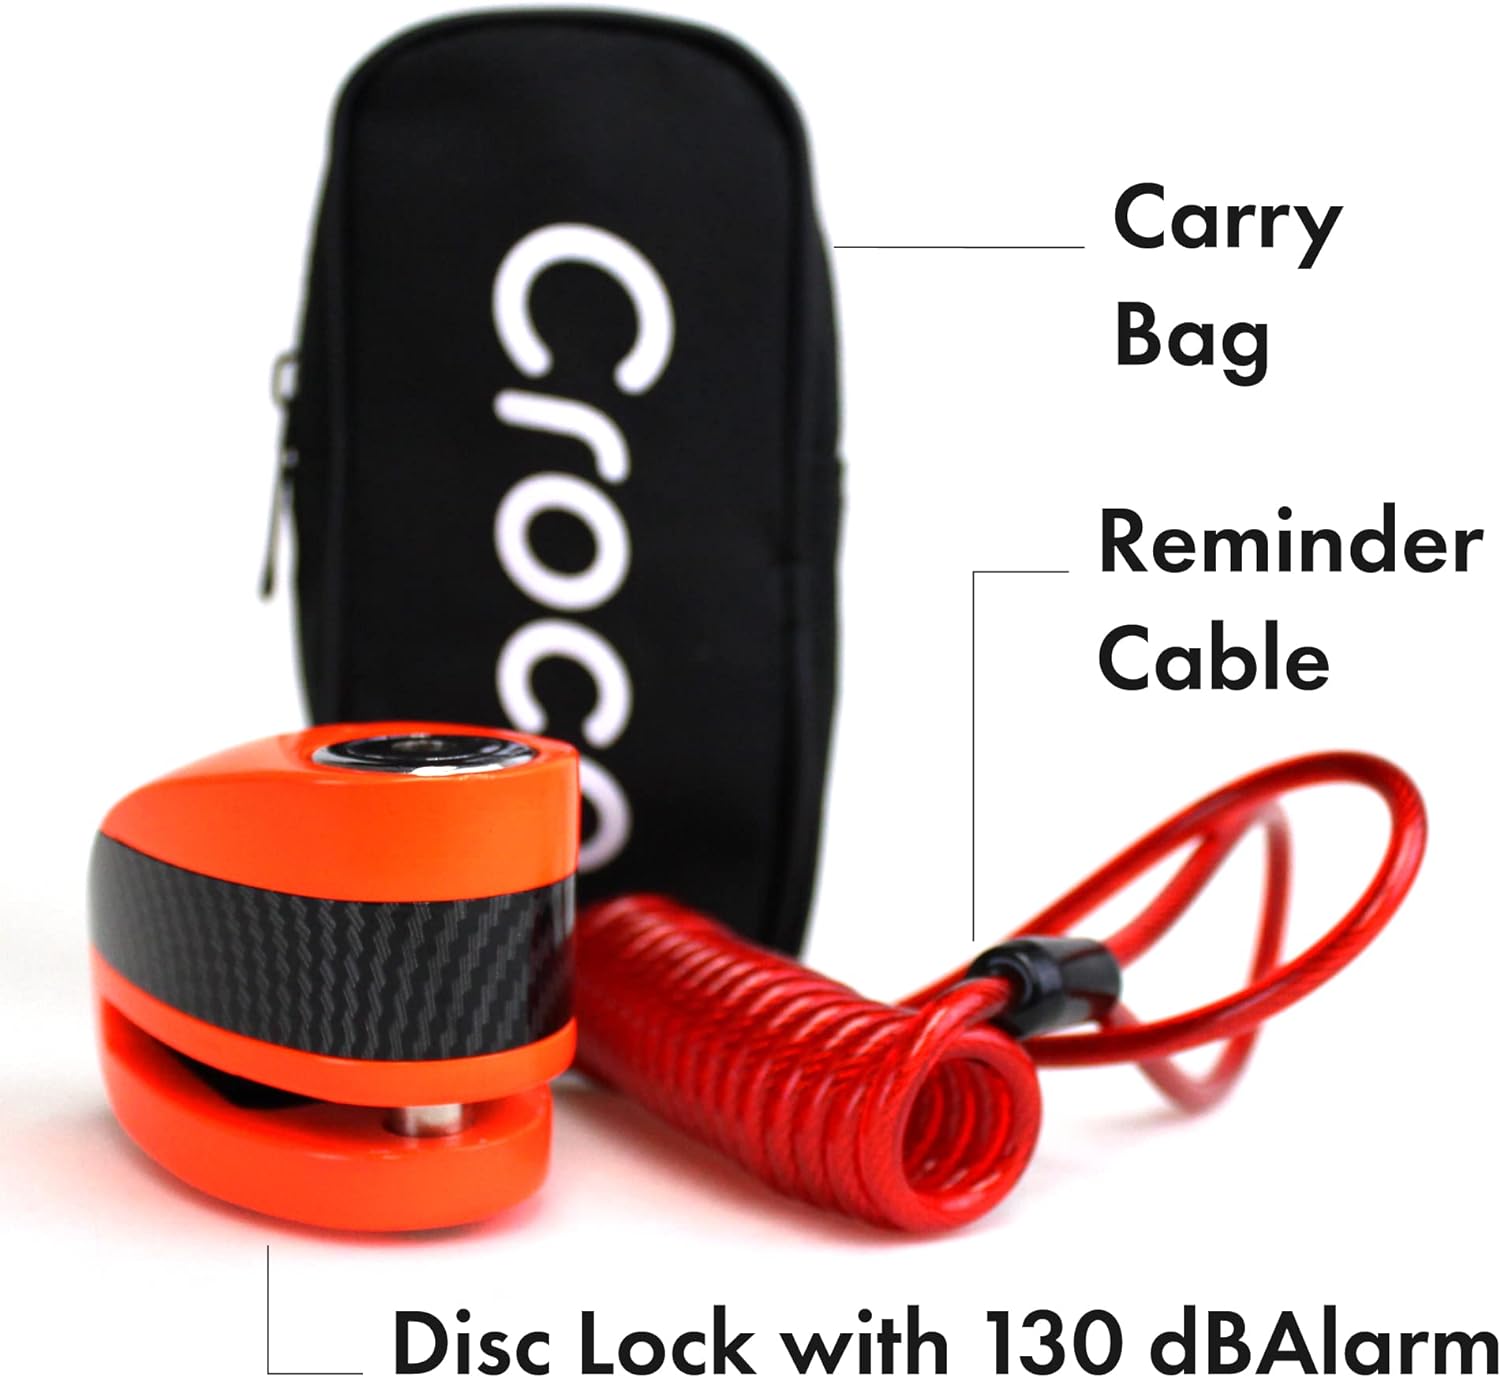 The image features a disc lock alarm system, designed to be a visual theft deterrent as well as a functional security device. The bold red color of the reminder cable stands out, reminding the owner to remove the lock before starting their vehicle. The lock itself appears sturdy, with a carbon fiber texture, and the carrying bag branded with "Croco" indicates a portable and convenient design. The use of bright colors, combined with the functional design, suggests an emphasis on both style and safety